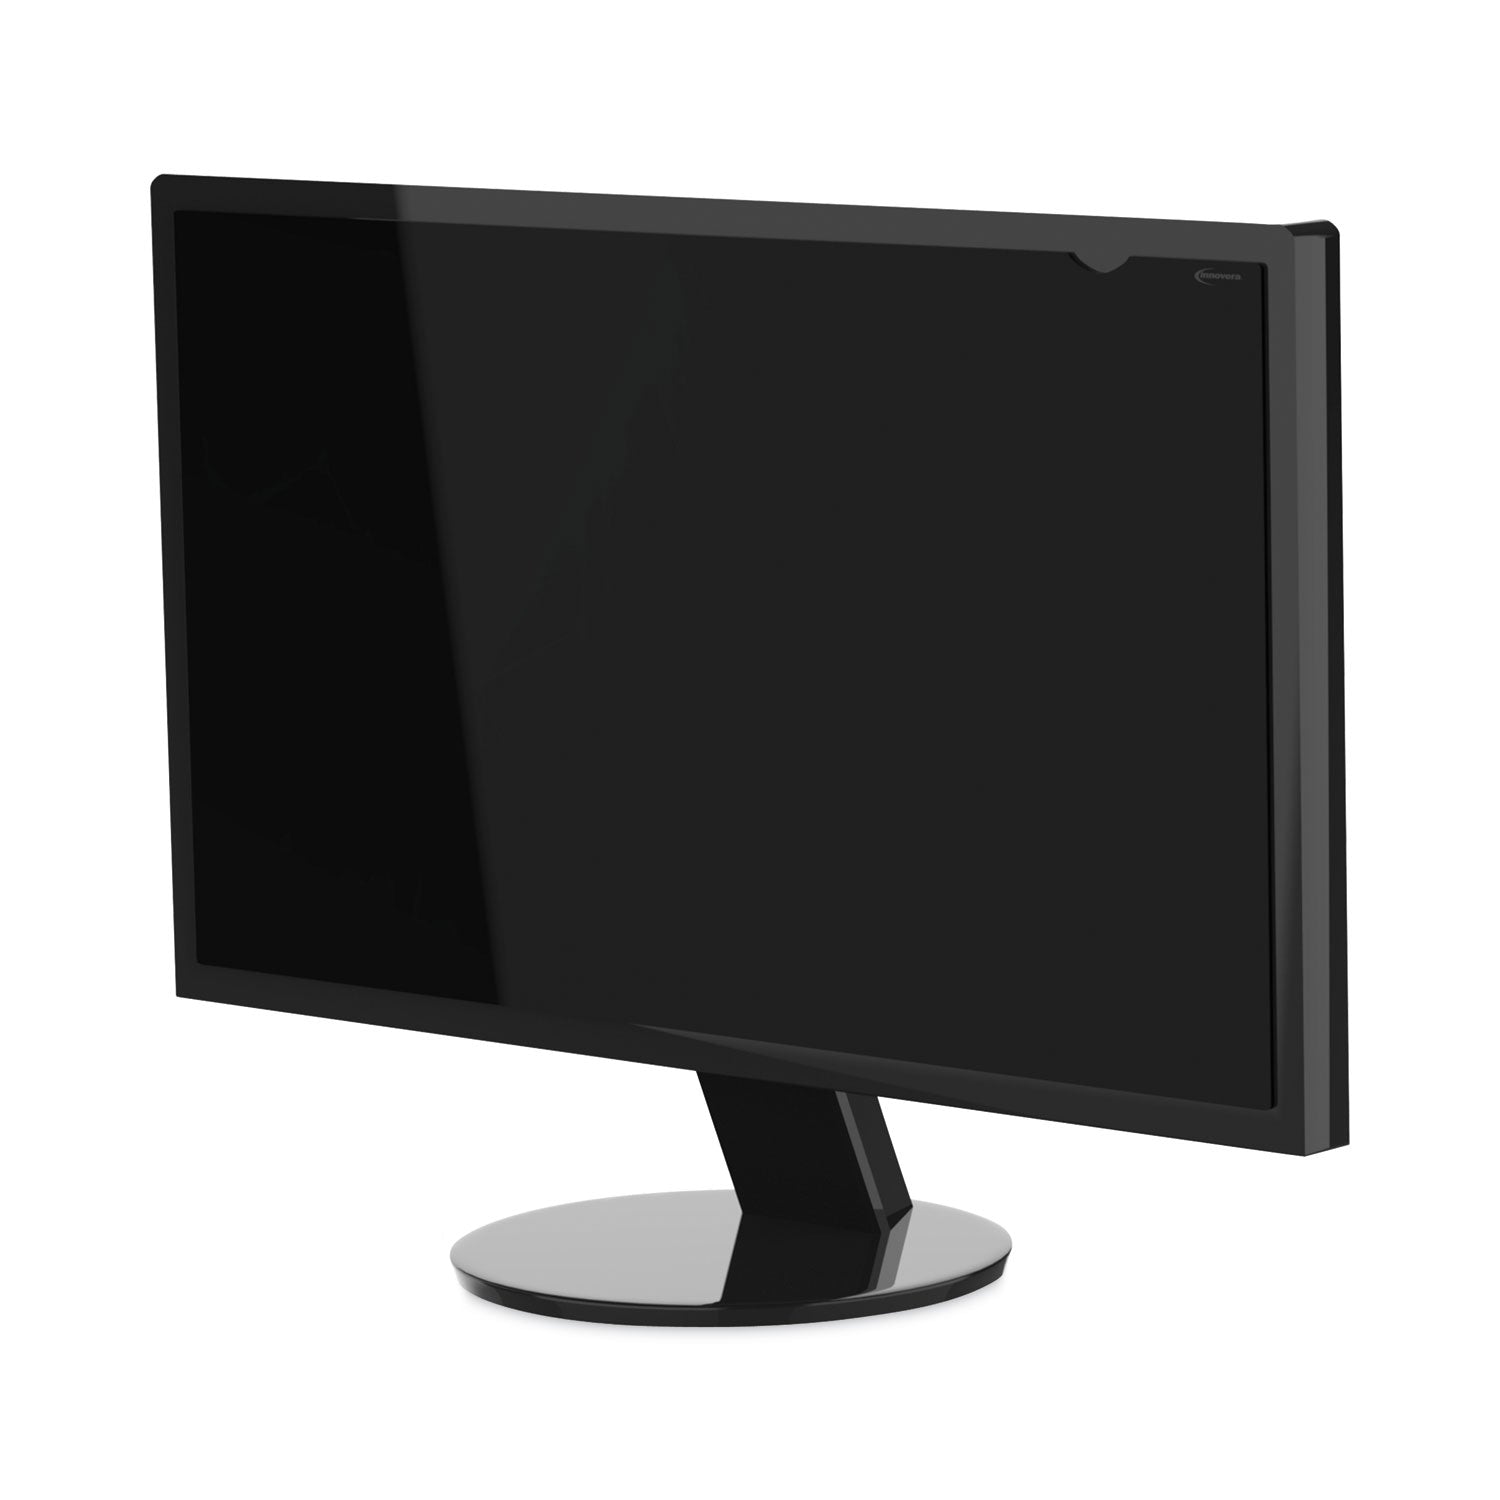 blackout-privacy-monitor-filter-for-236-widescreen-flat-panel-monitor-169-aspect-ratio_ivrblf236w - 5